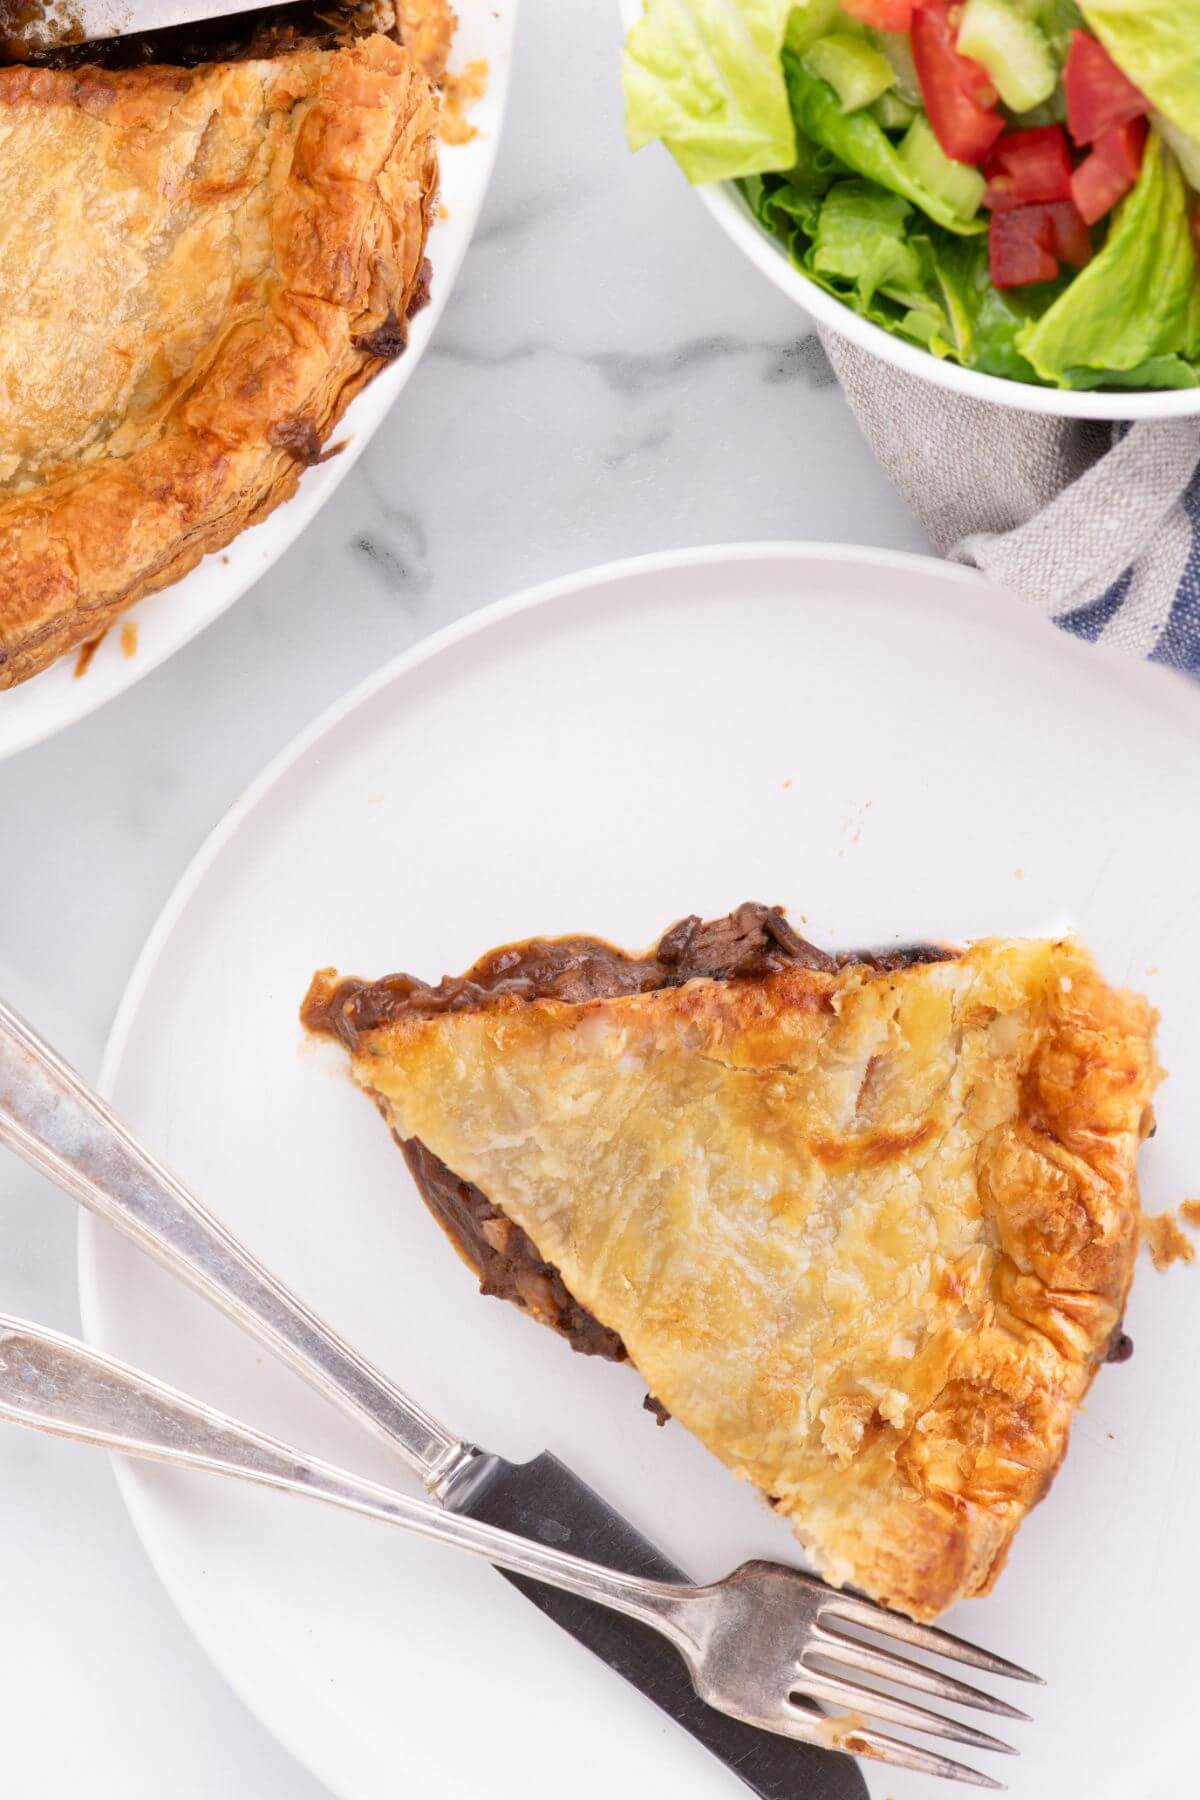 A fork and knife lay by a golden flaky steak pie slice and salad.